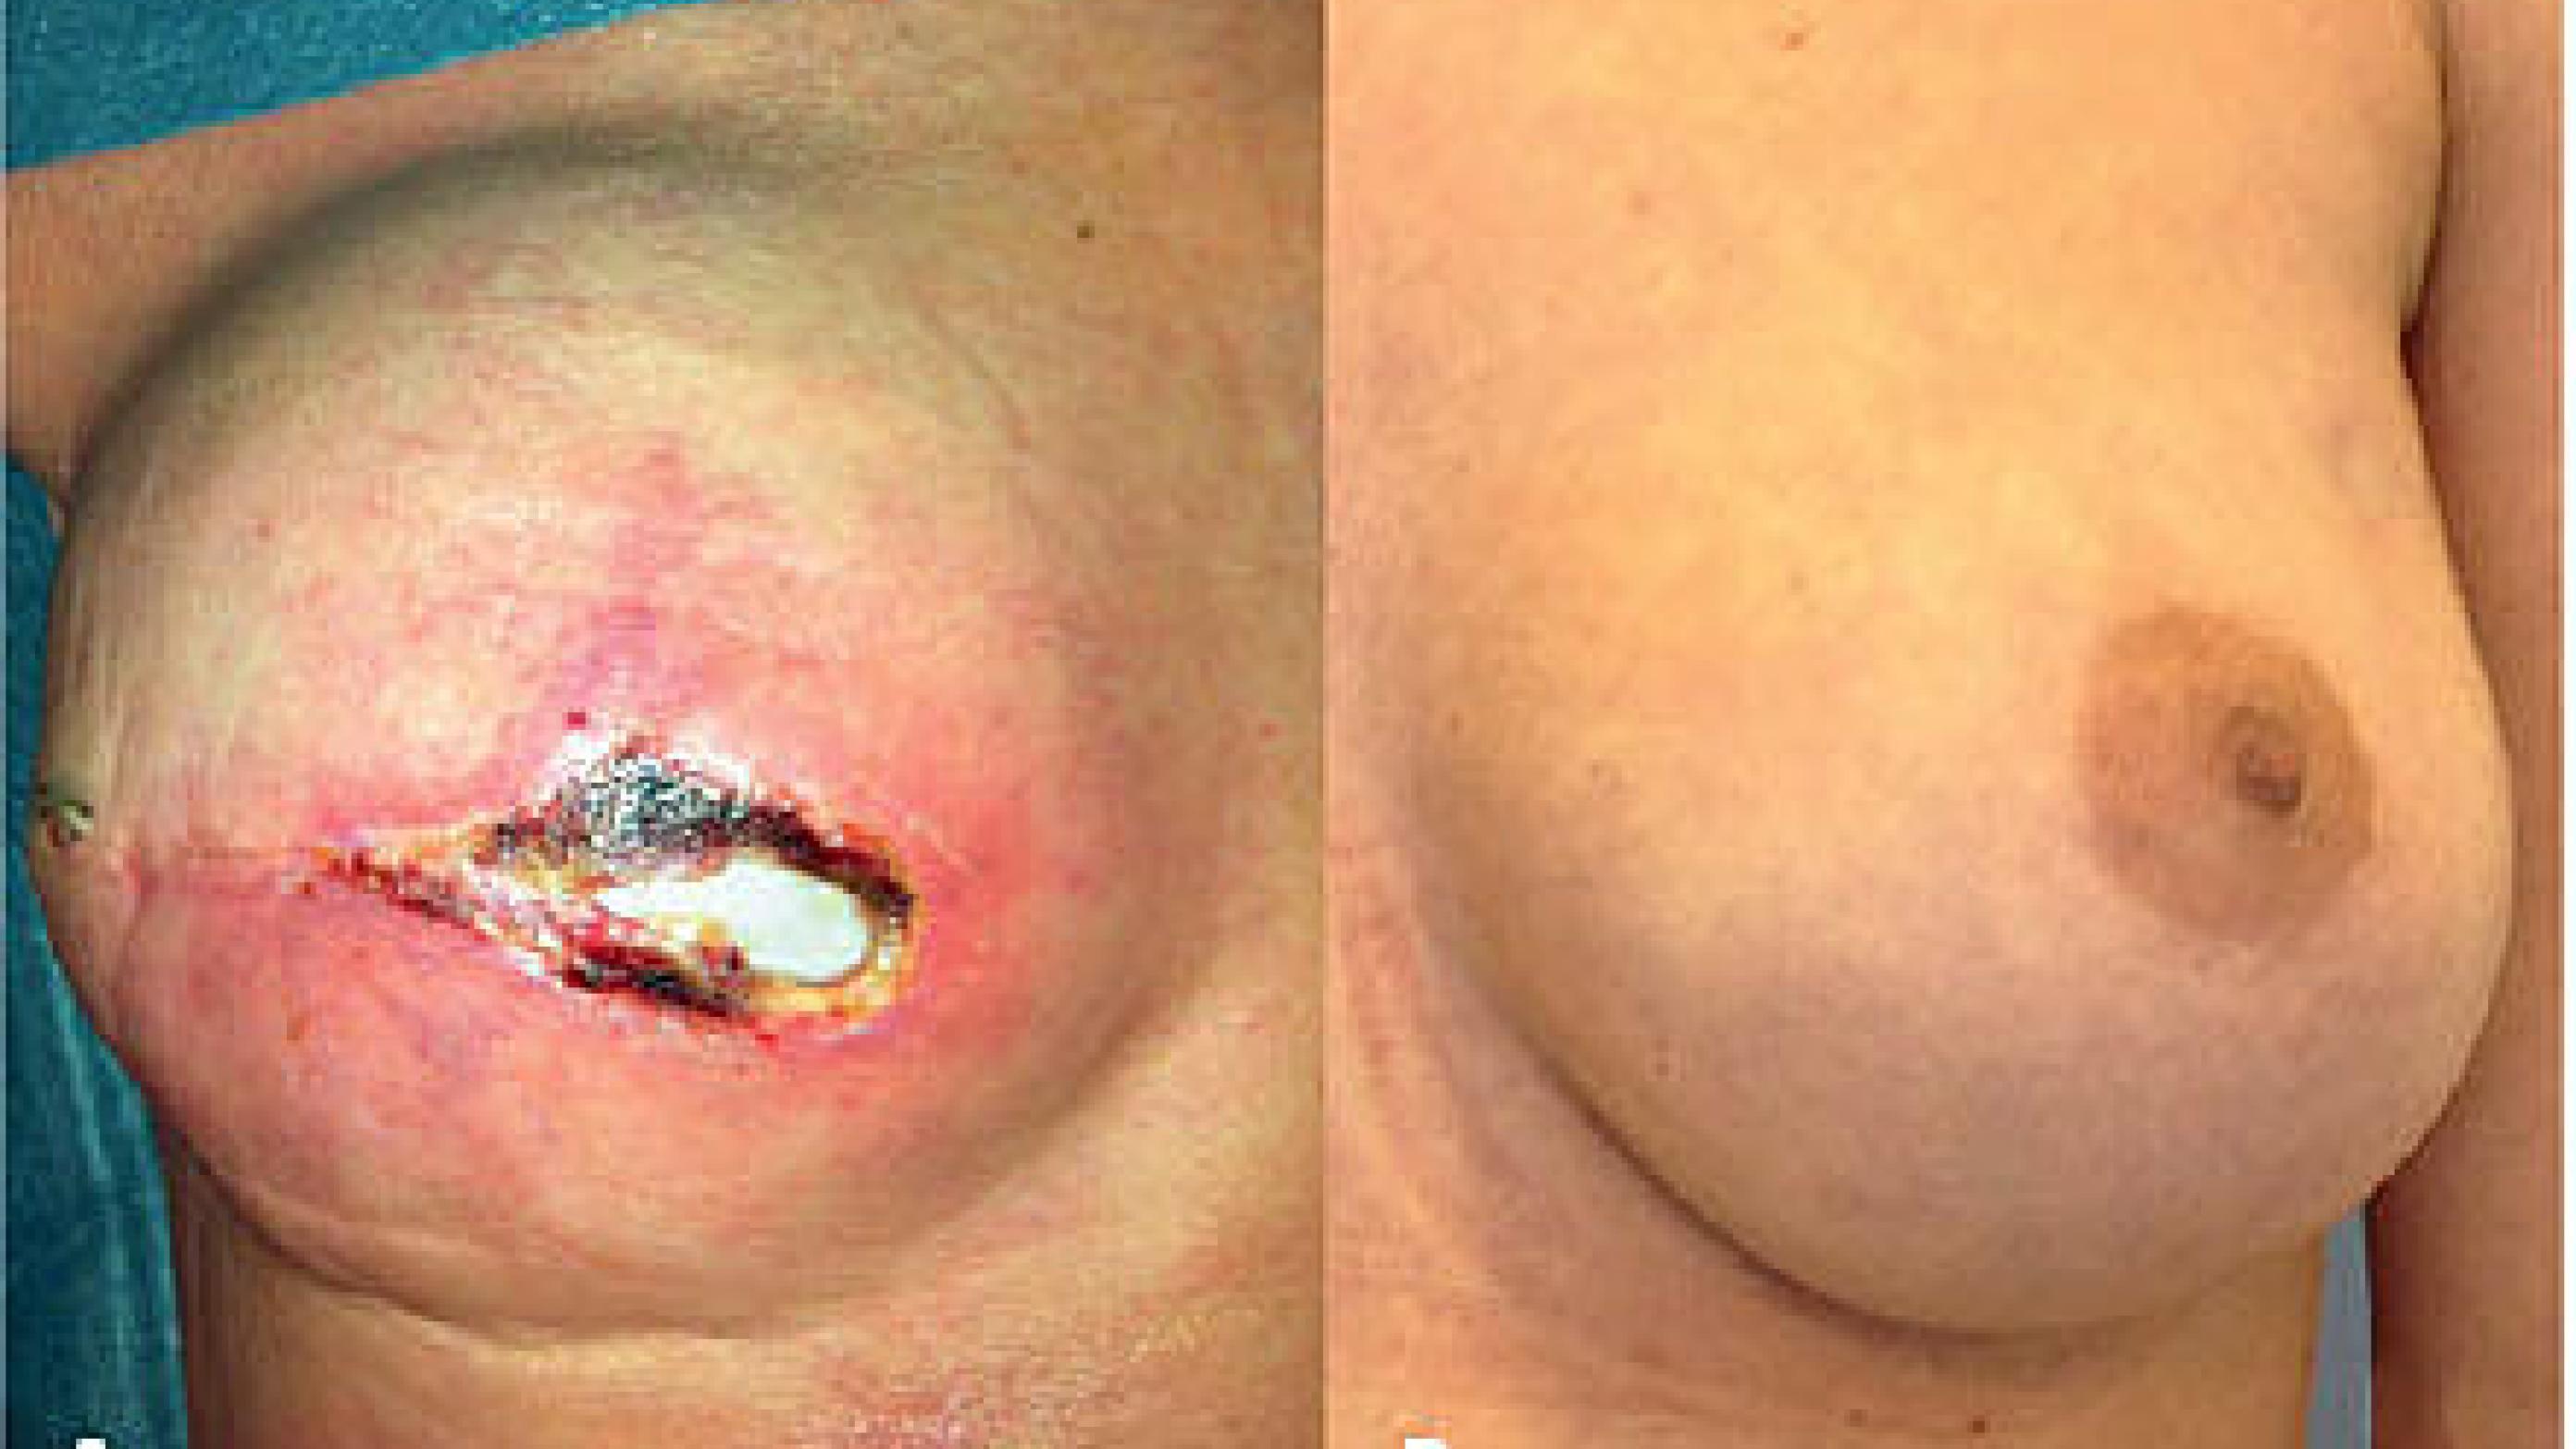 Post-operative results: A. Skin flap necrosis in a smoker revealing the acellular dermal matrix underneath. B. Nipple-sparing breast reconstruction in a non-smoker.